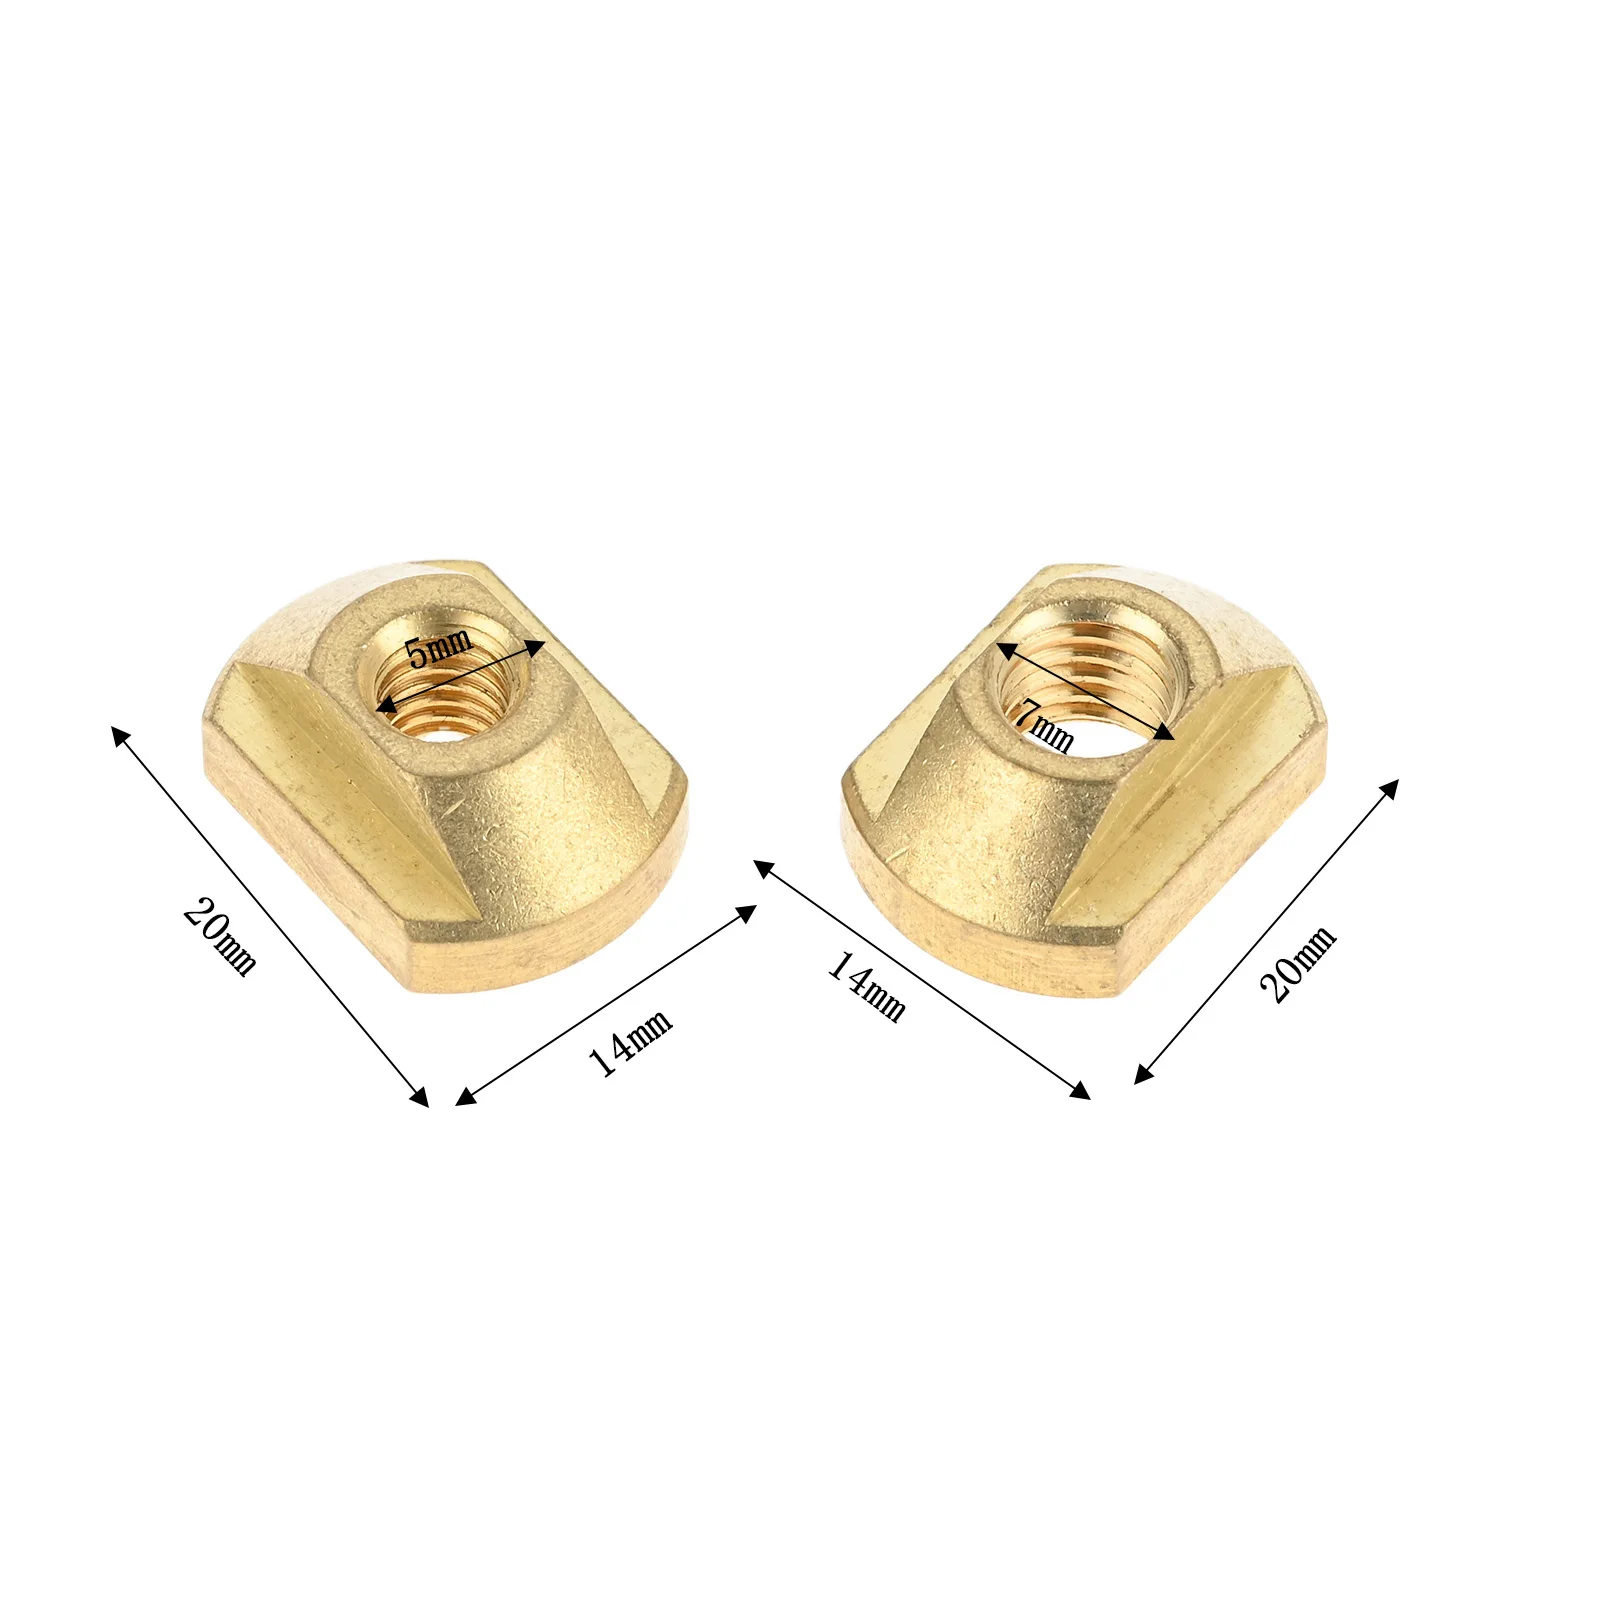 4Pcs Gold M8 M6 Mounting Brass T-Nuts Fit For Water Sports Surfing All Hydrofoil Tracks Outdoors Surfing Accessories